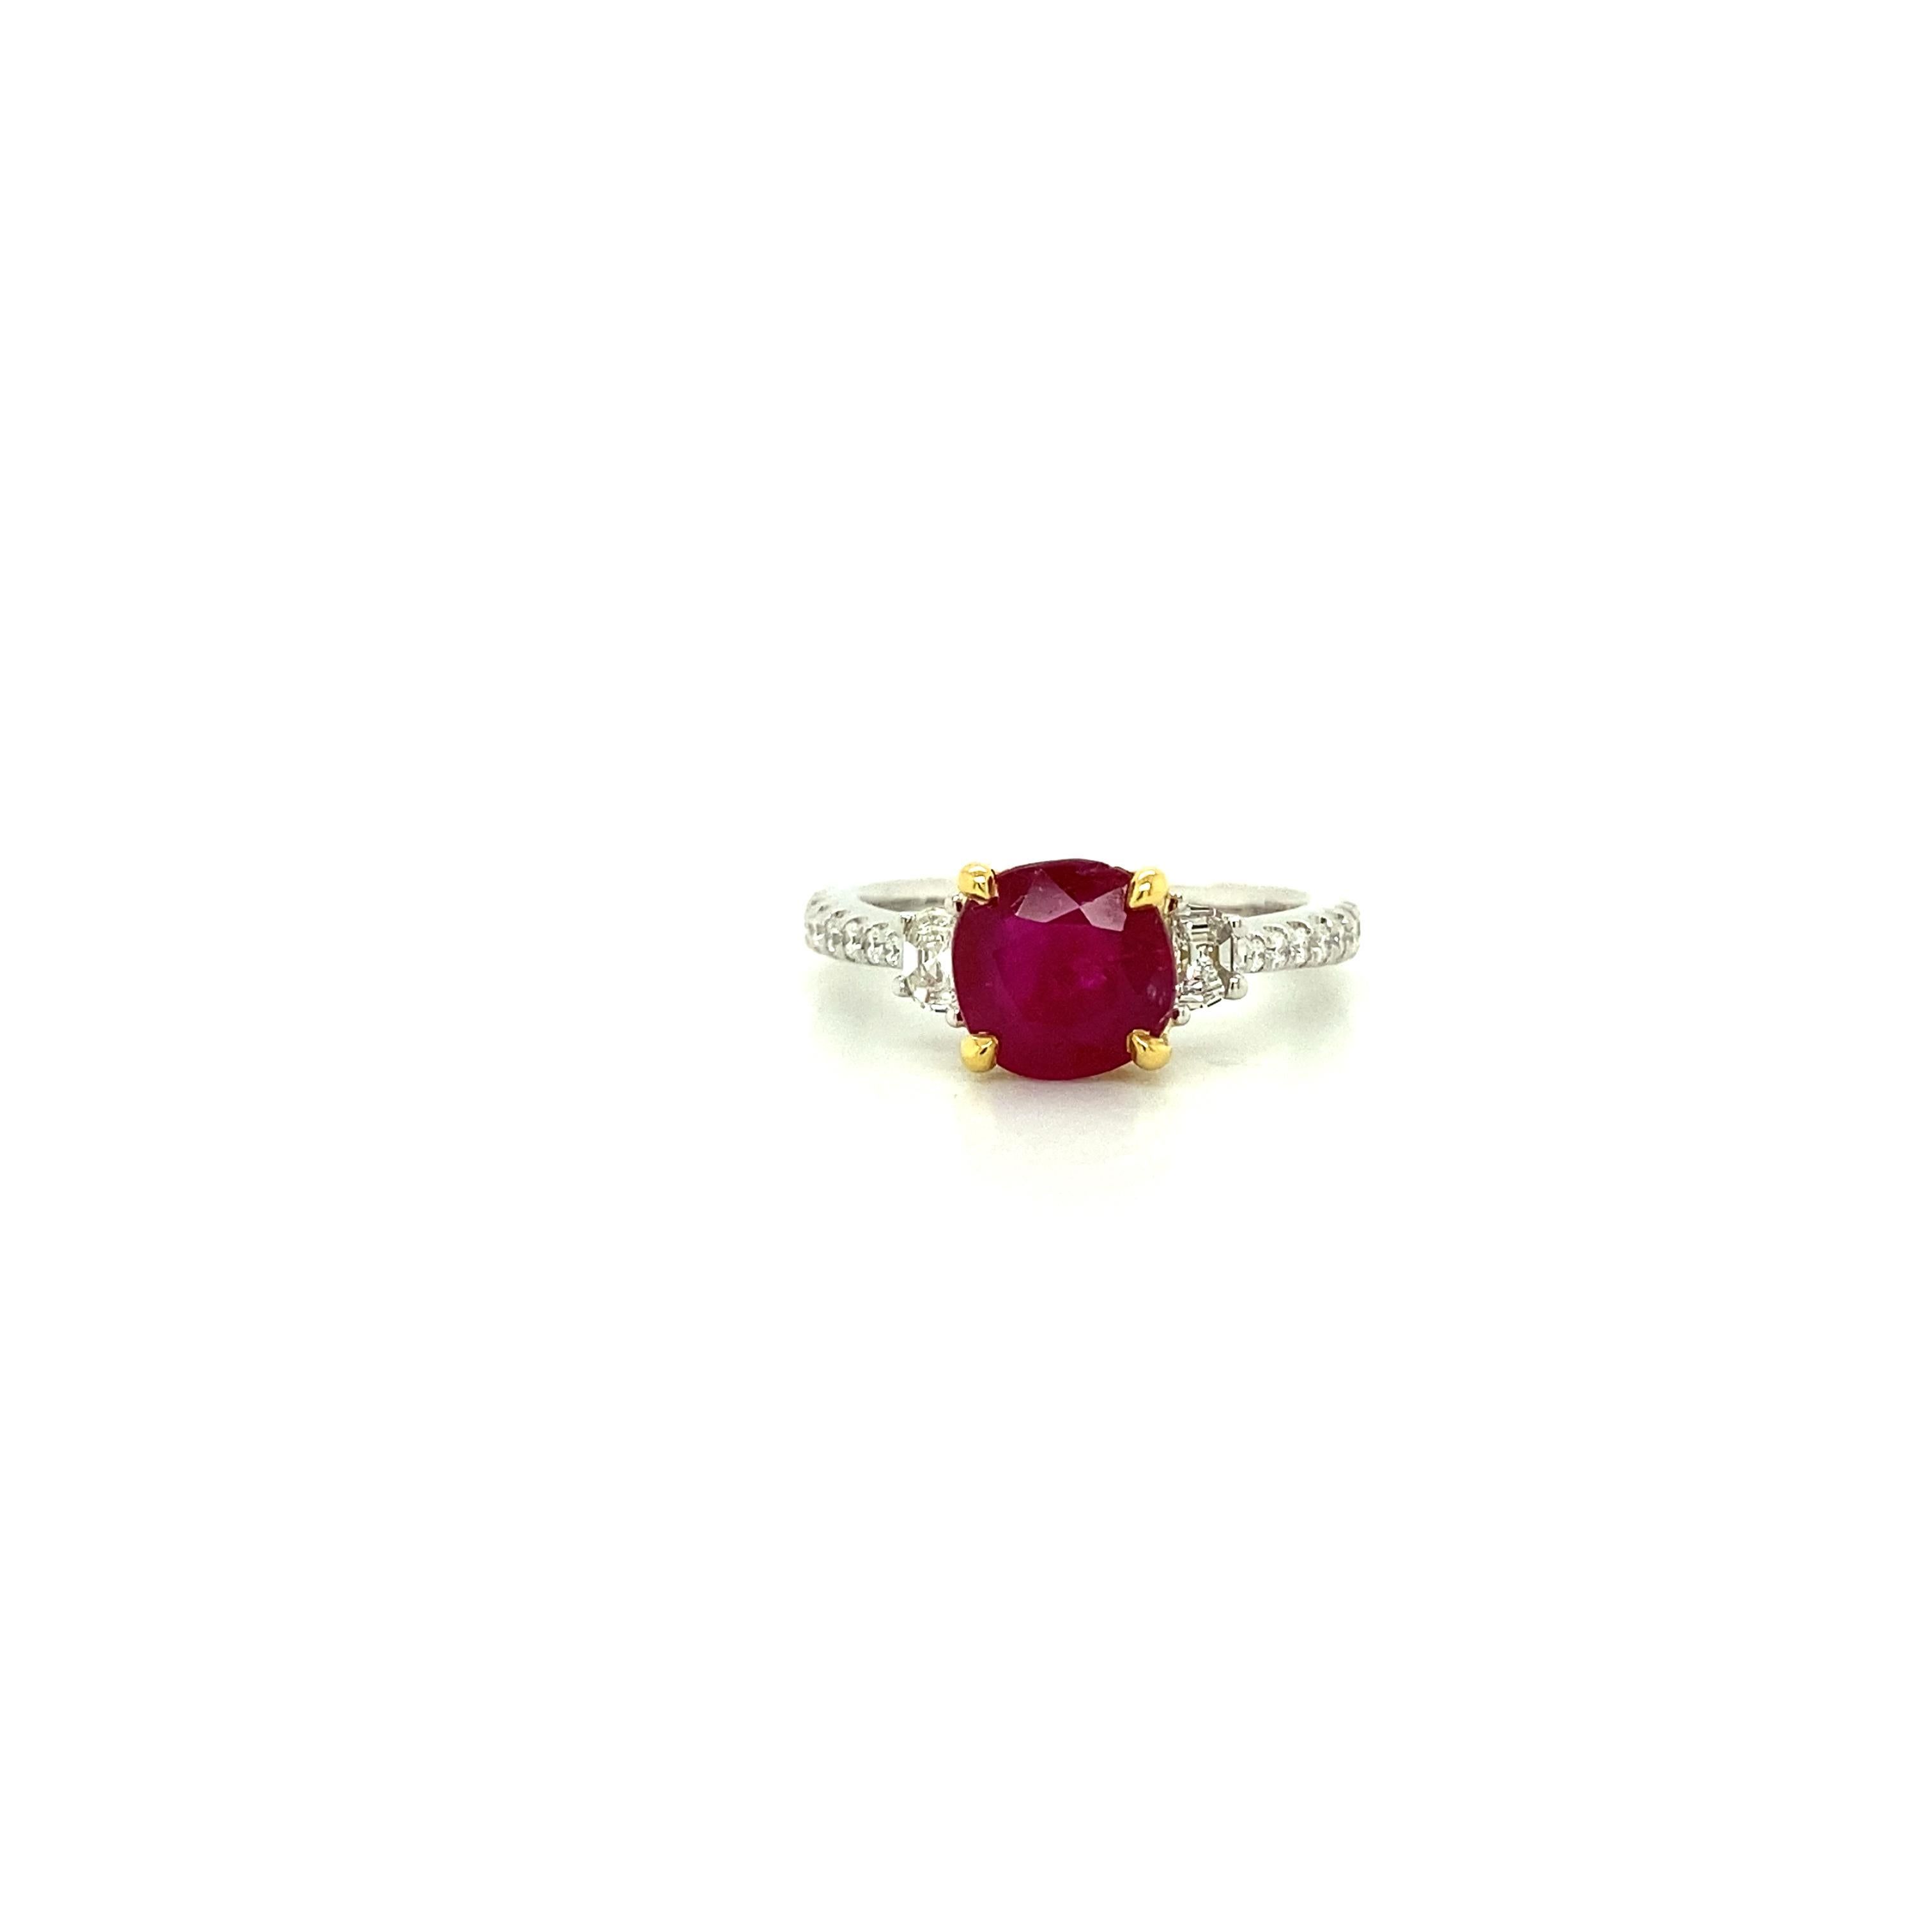 1.93 Carat GIA Certified Unheated Vivid Red Burmese Ruby and Diamond Gold Ring:

A gorgeous jewel, it features a 1.93 carat GIA certified unheated pigeon's blood red cushion-cut Burmese ruby with two white baguette diamonds on the sides weighing